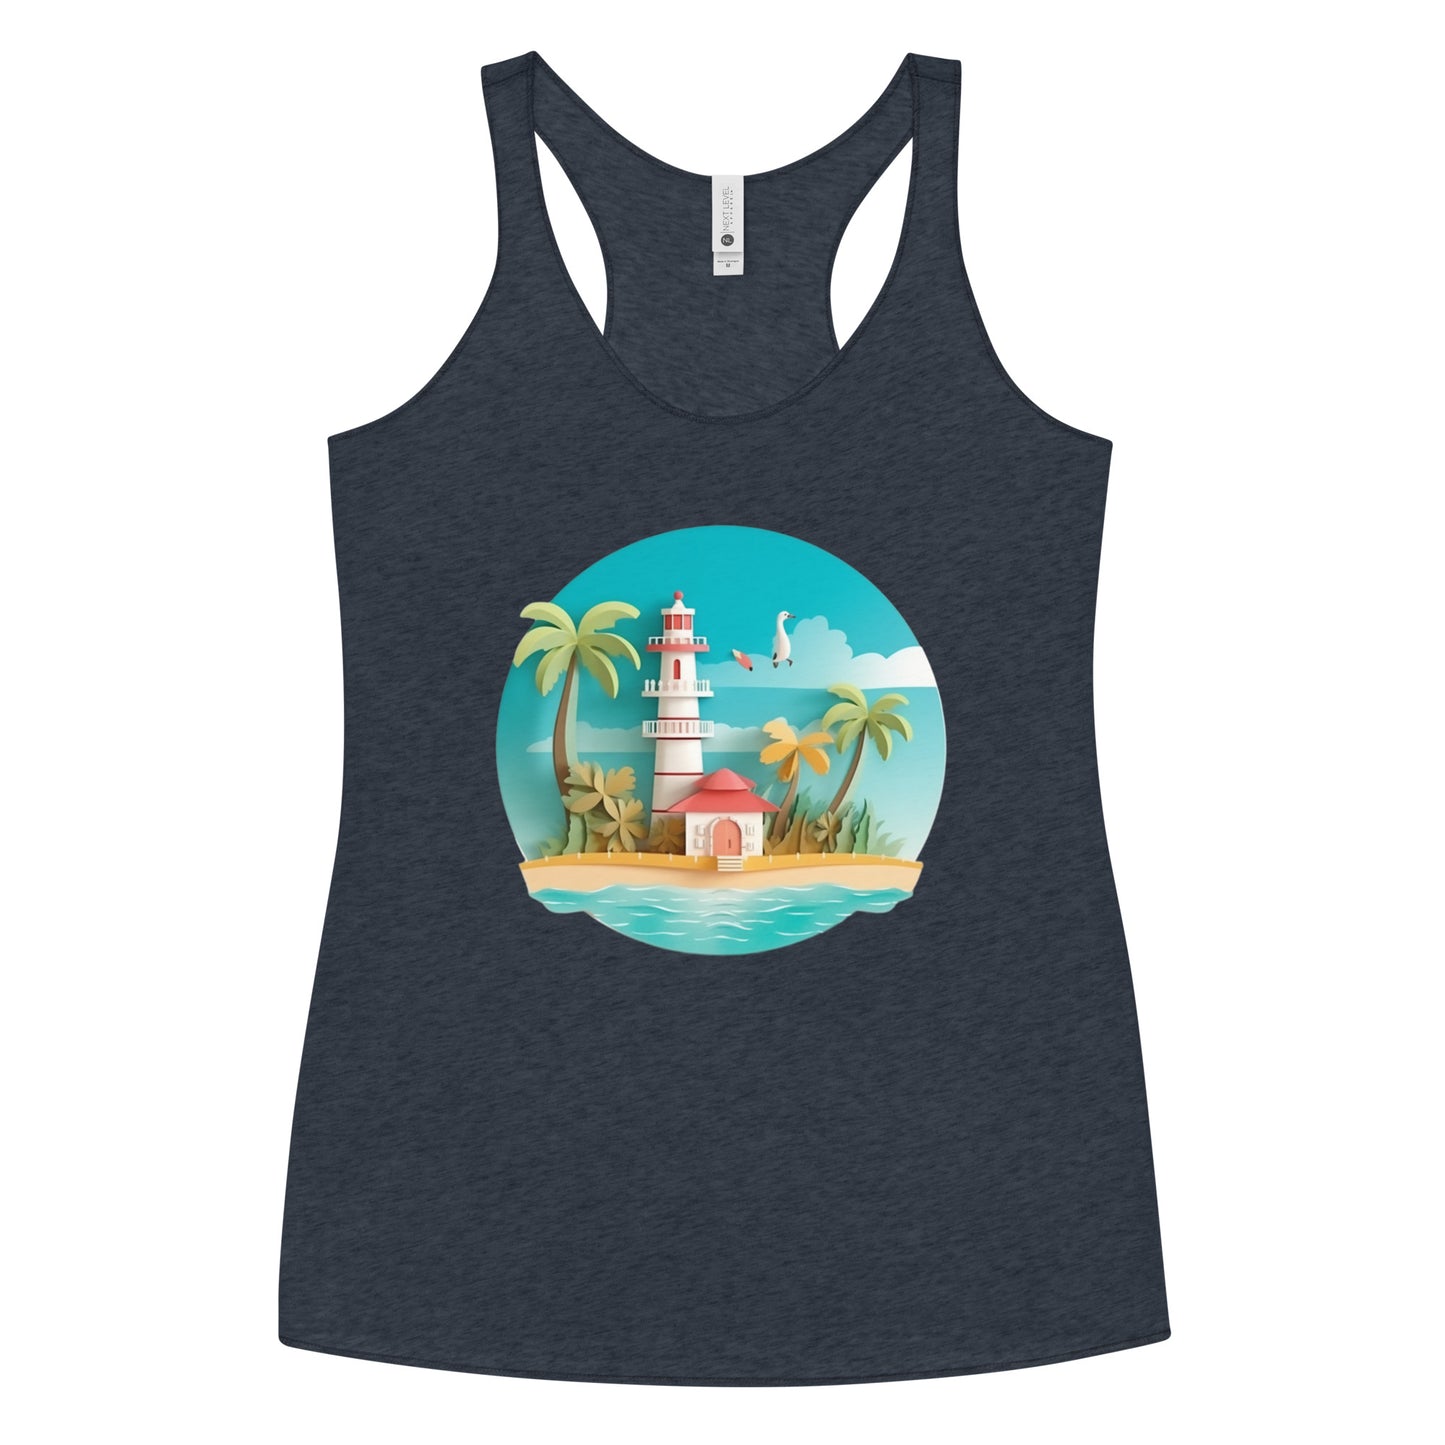 Navy blue tank top with picture of lighthouse and palm trees